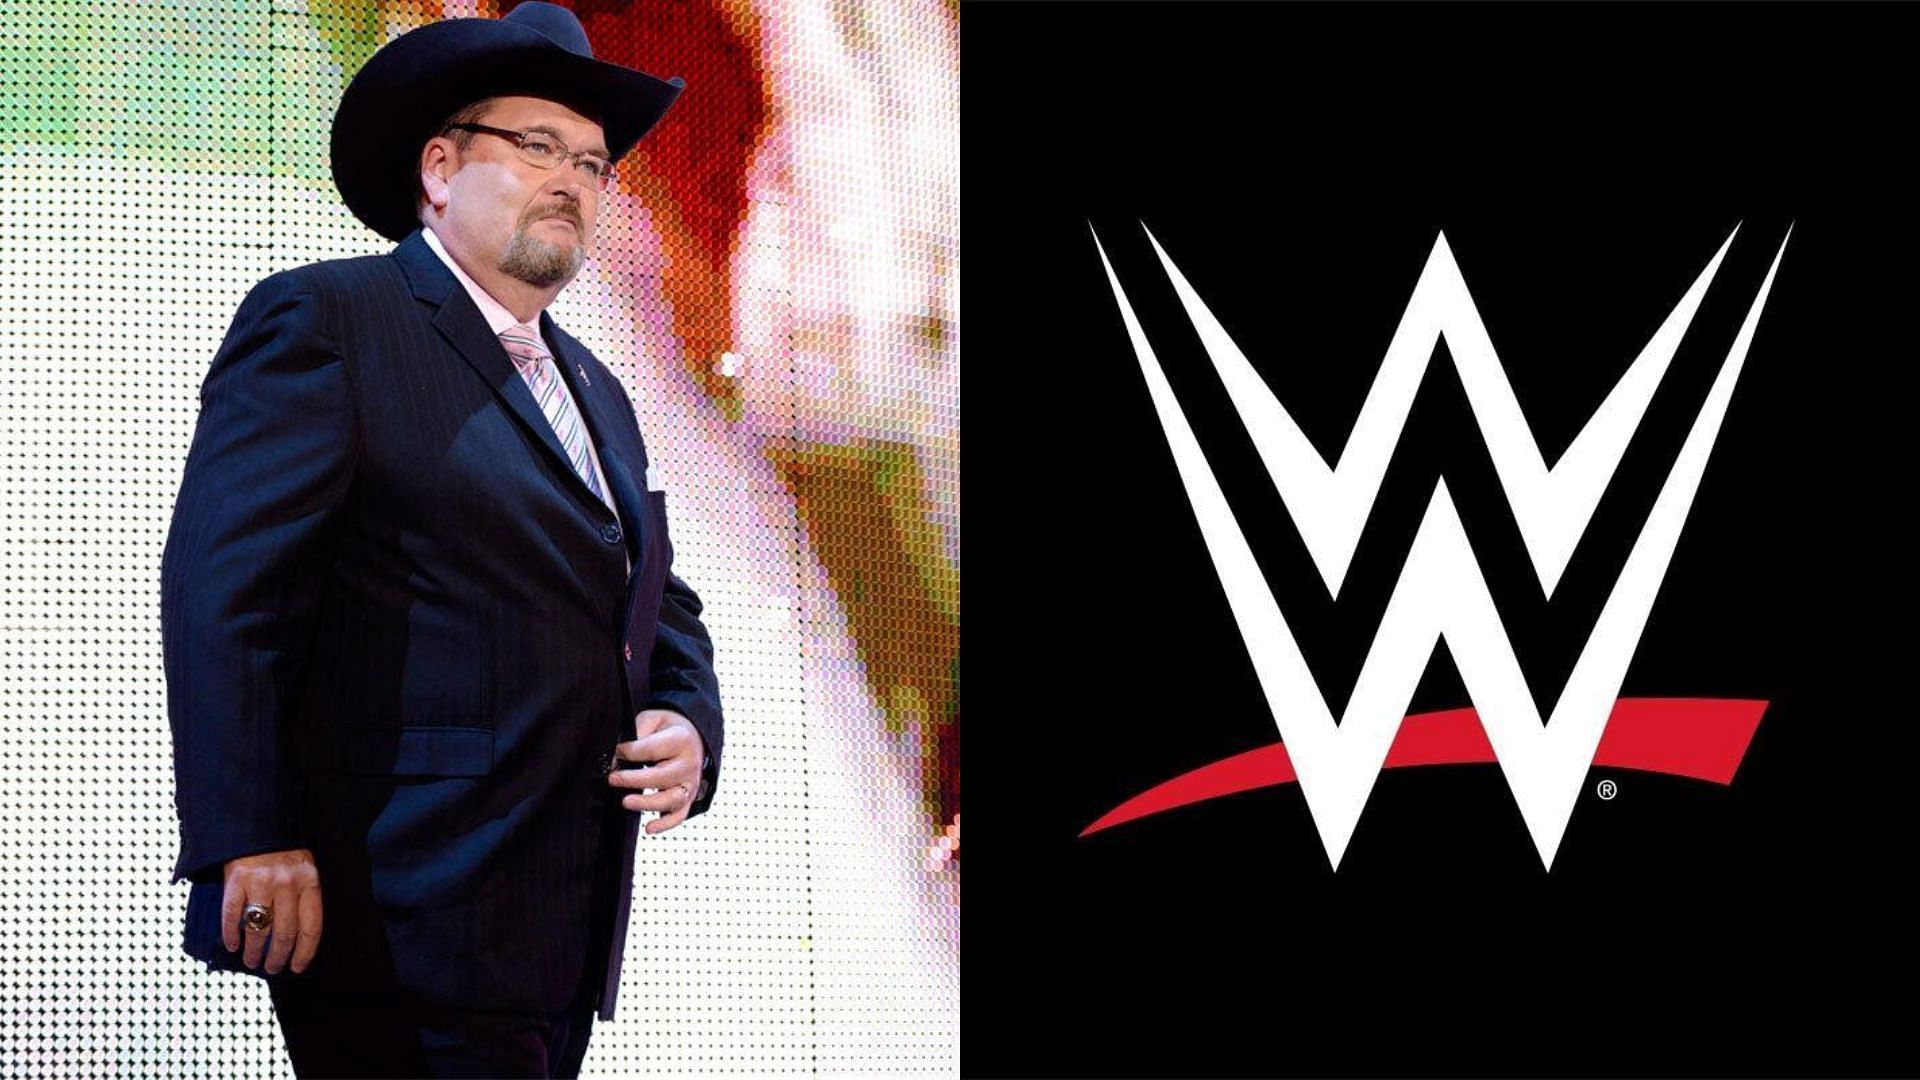 Jim Ross (left) and WWE logo (right)